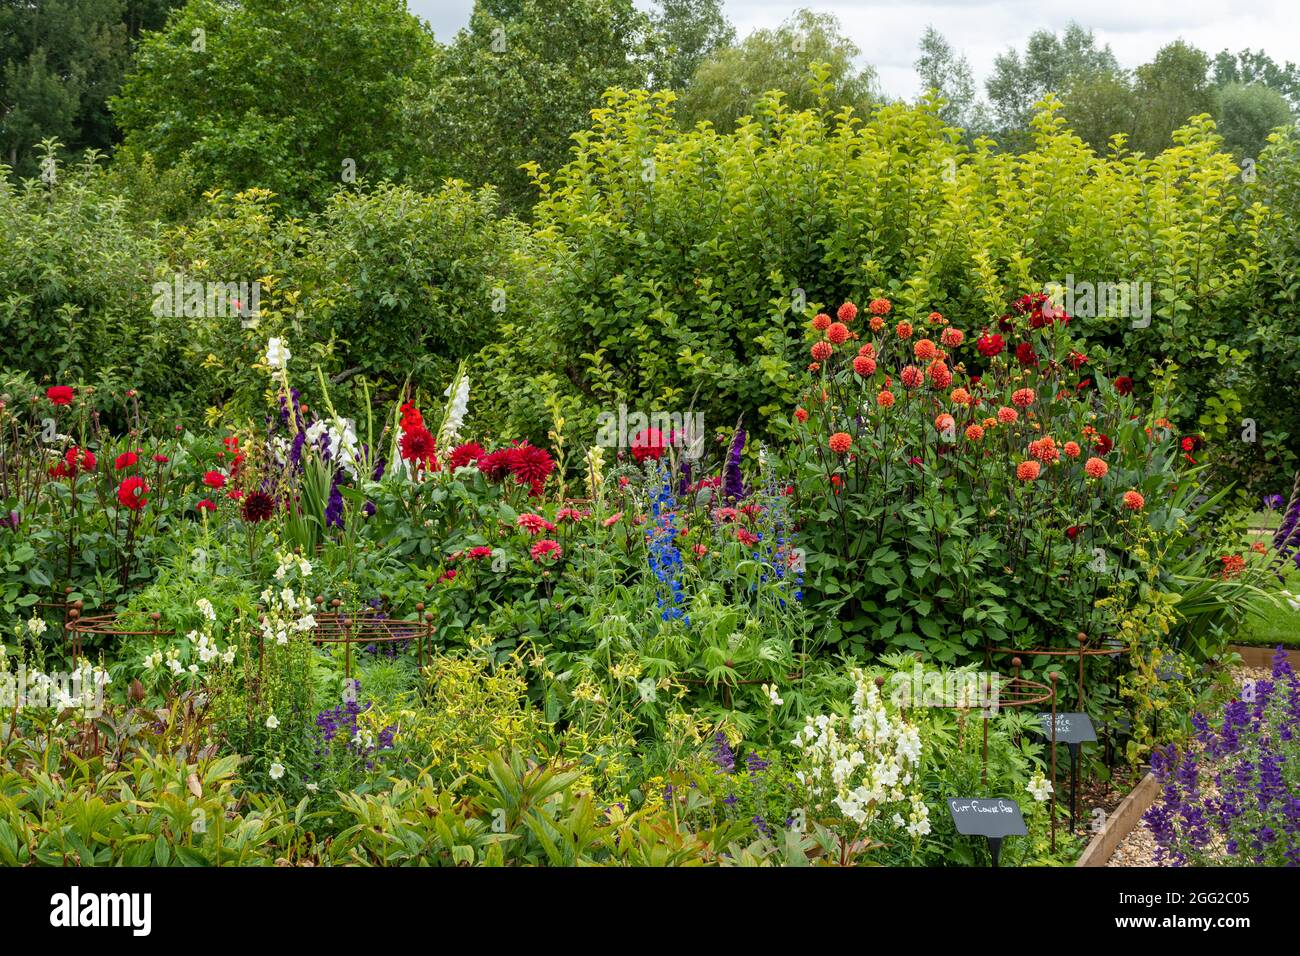 Houghton Lodge Gardens in Hampshire, England, UK, during August or summer. The Cut Flower Garden with colourful flowers, part of the walled gardens. Stock Photo